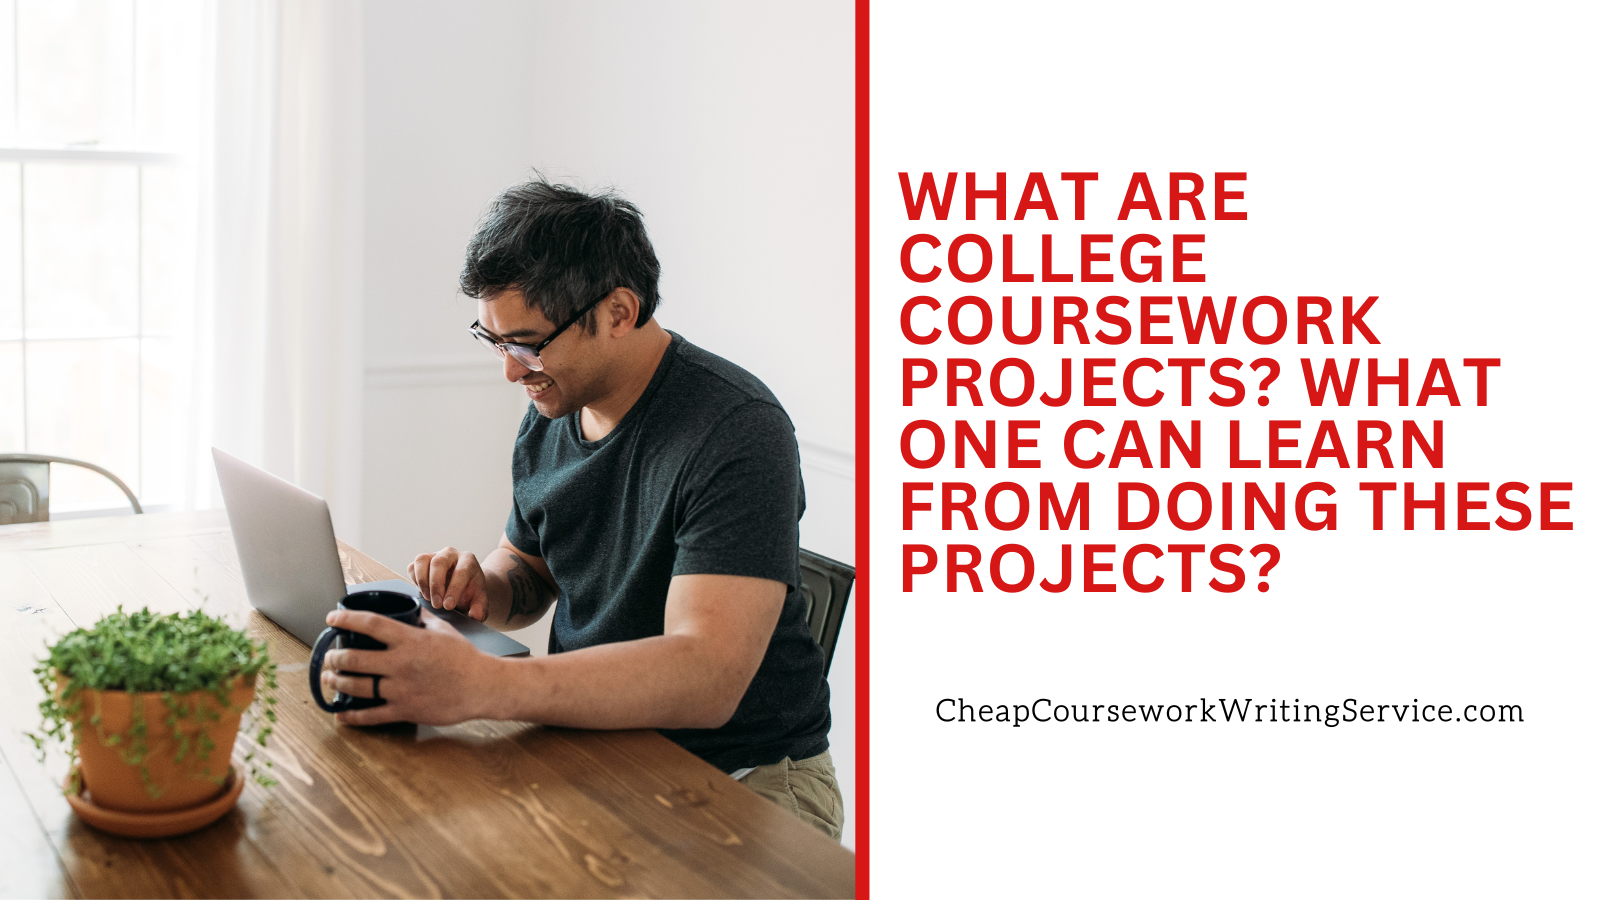 What Are College Coursework Projects? What Can Be Learned From Taking a College Coursework Project?